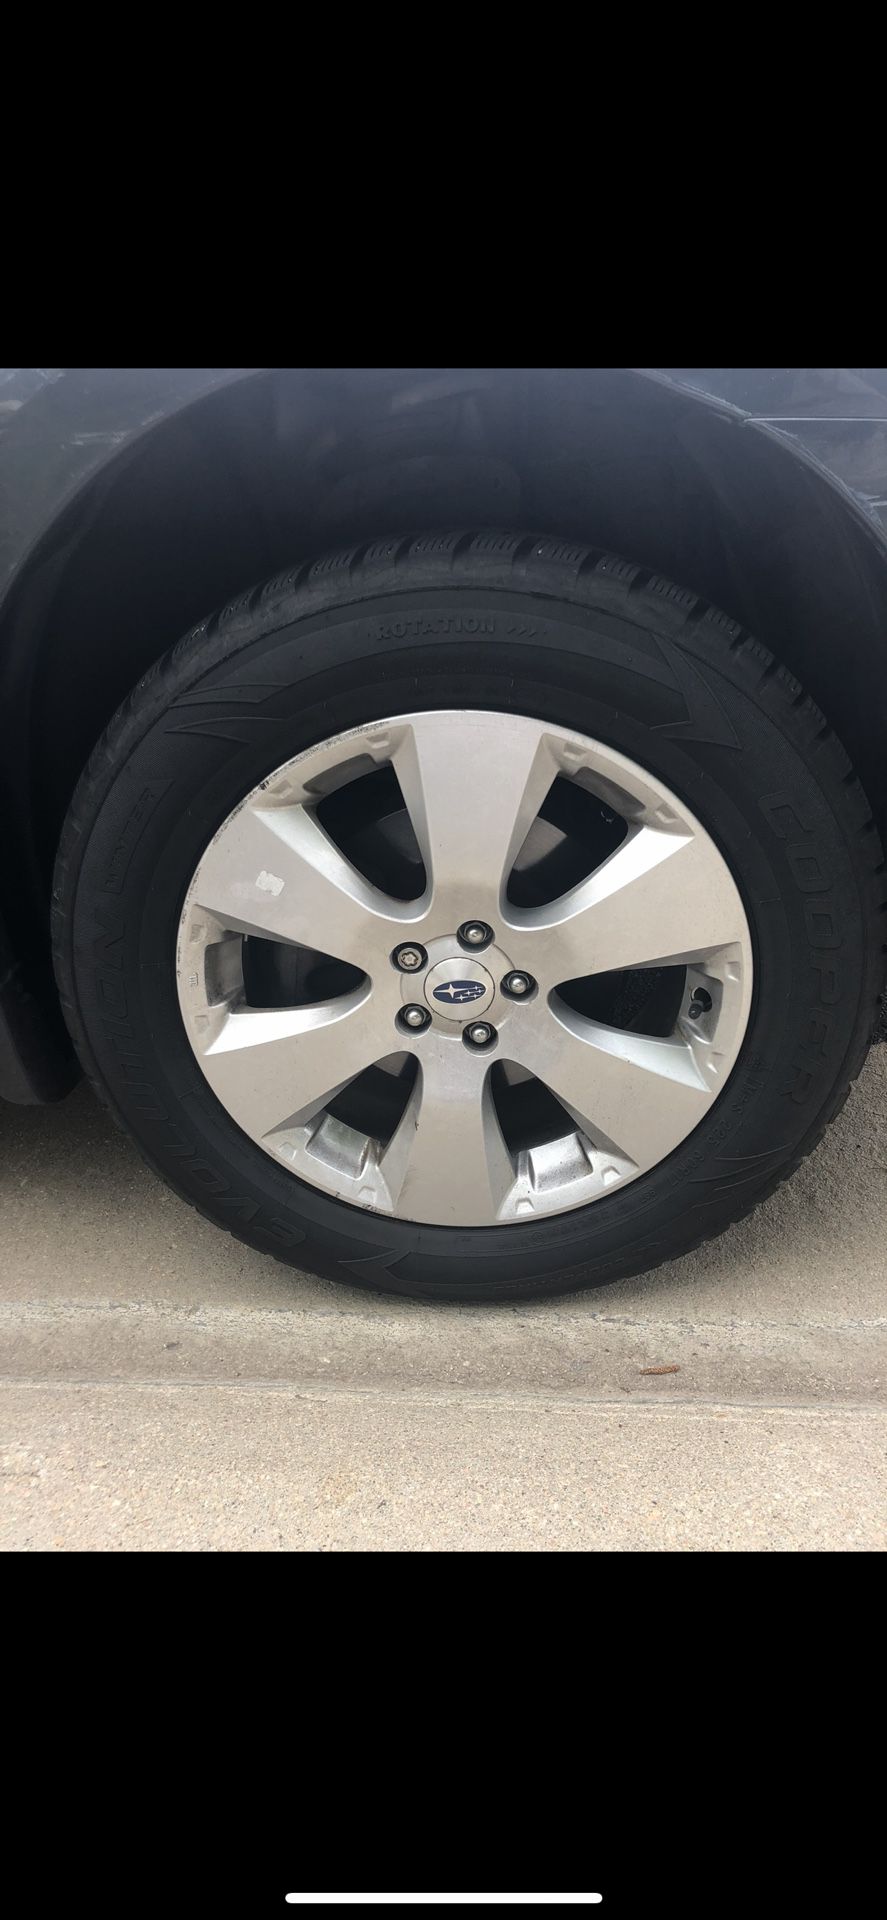 Cooper Evolution Winter Tires (Serious inquiries only)